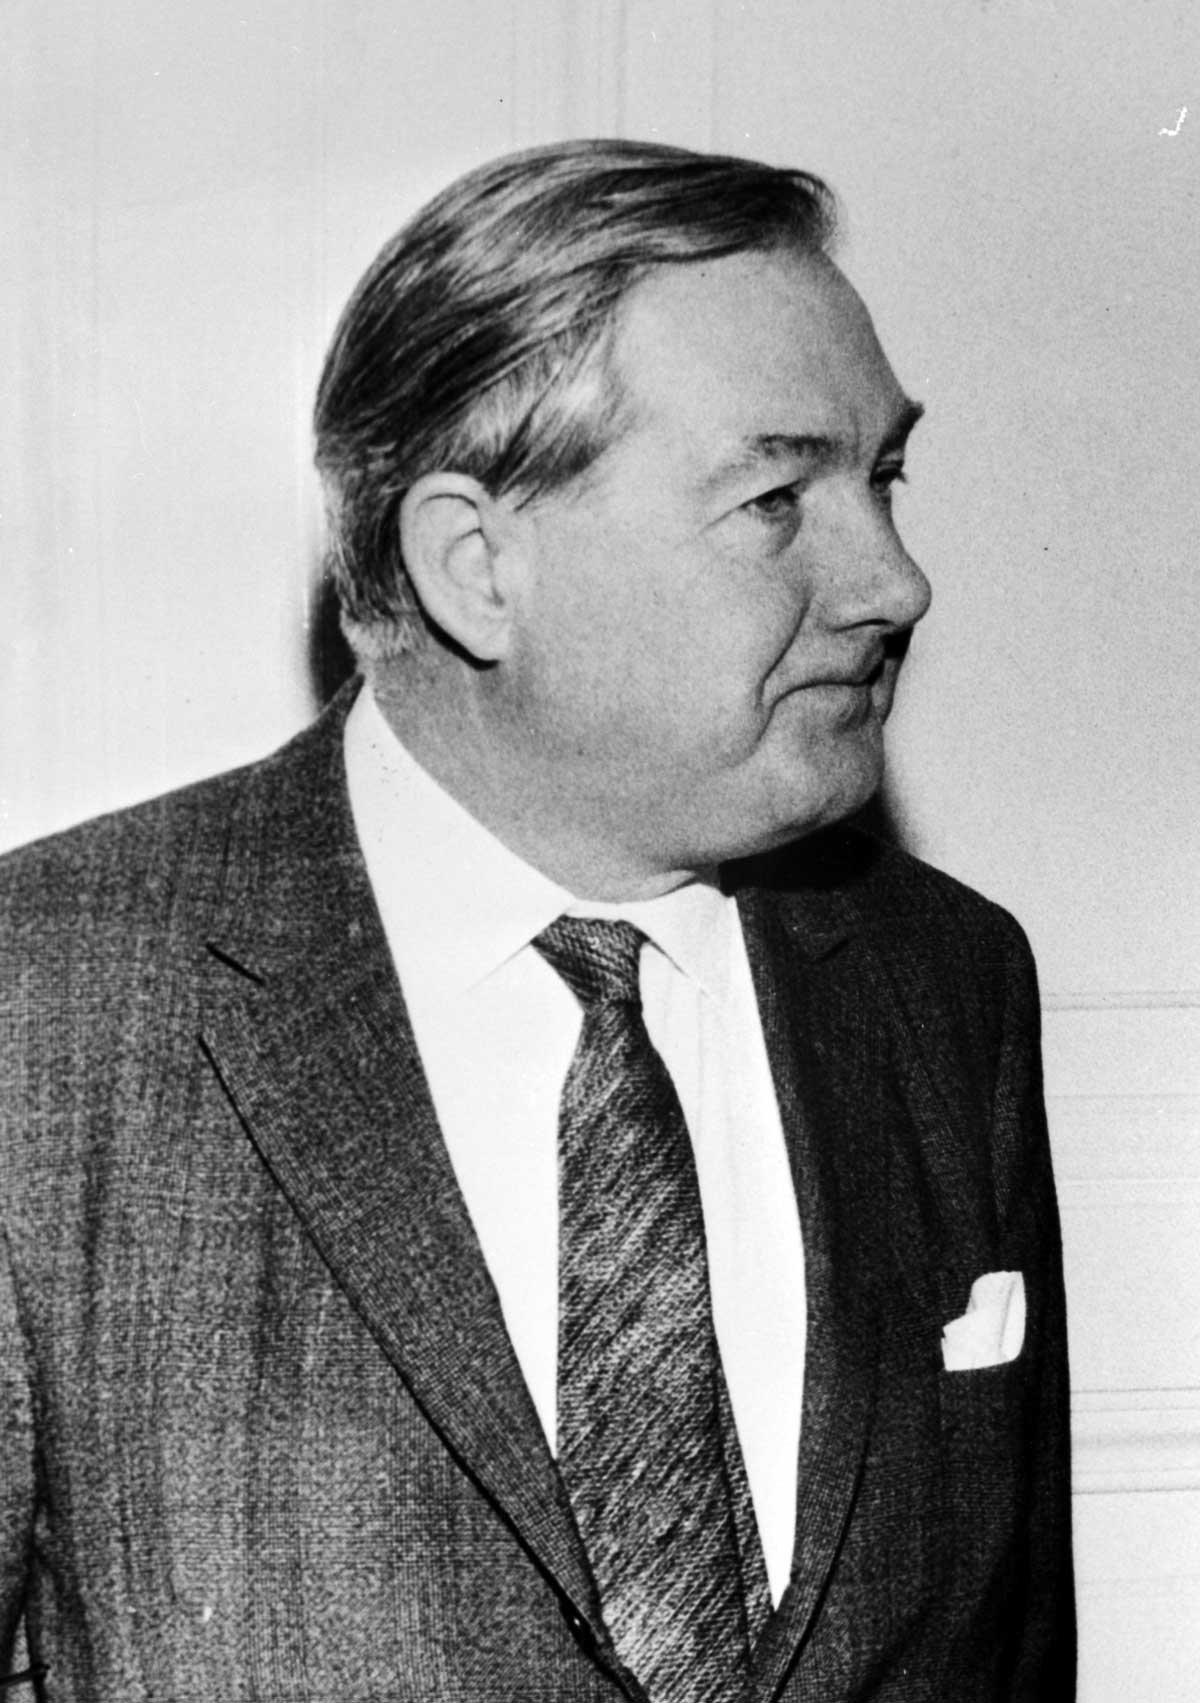 Black and white photo of a man in a dark suit and tie and short hair combed back, pursing his lips.